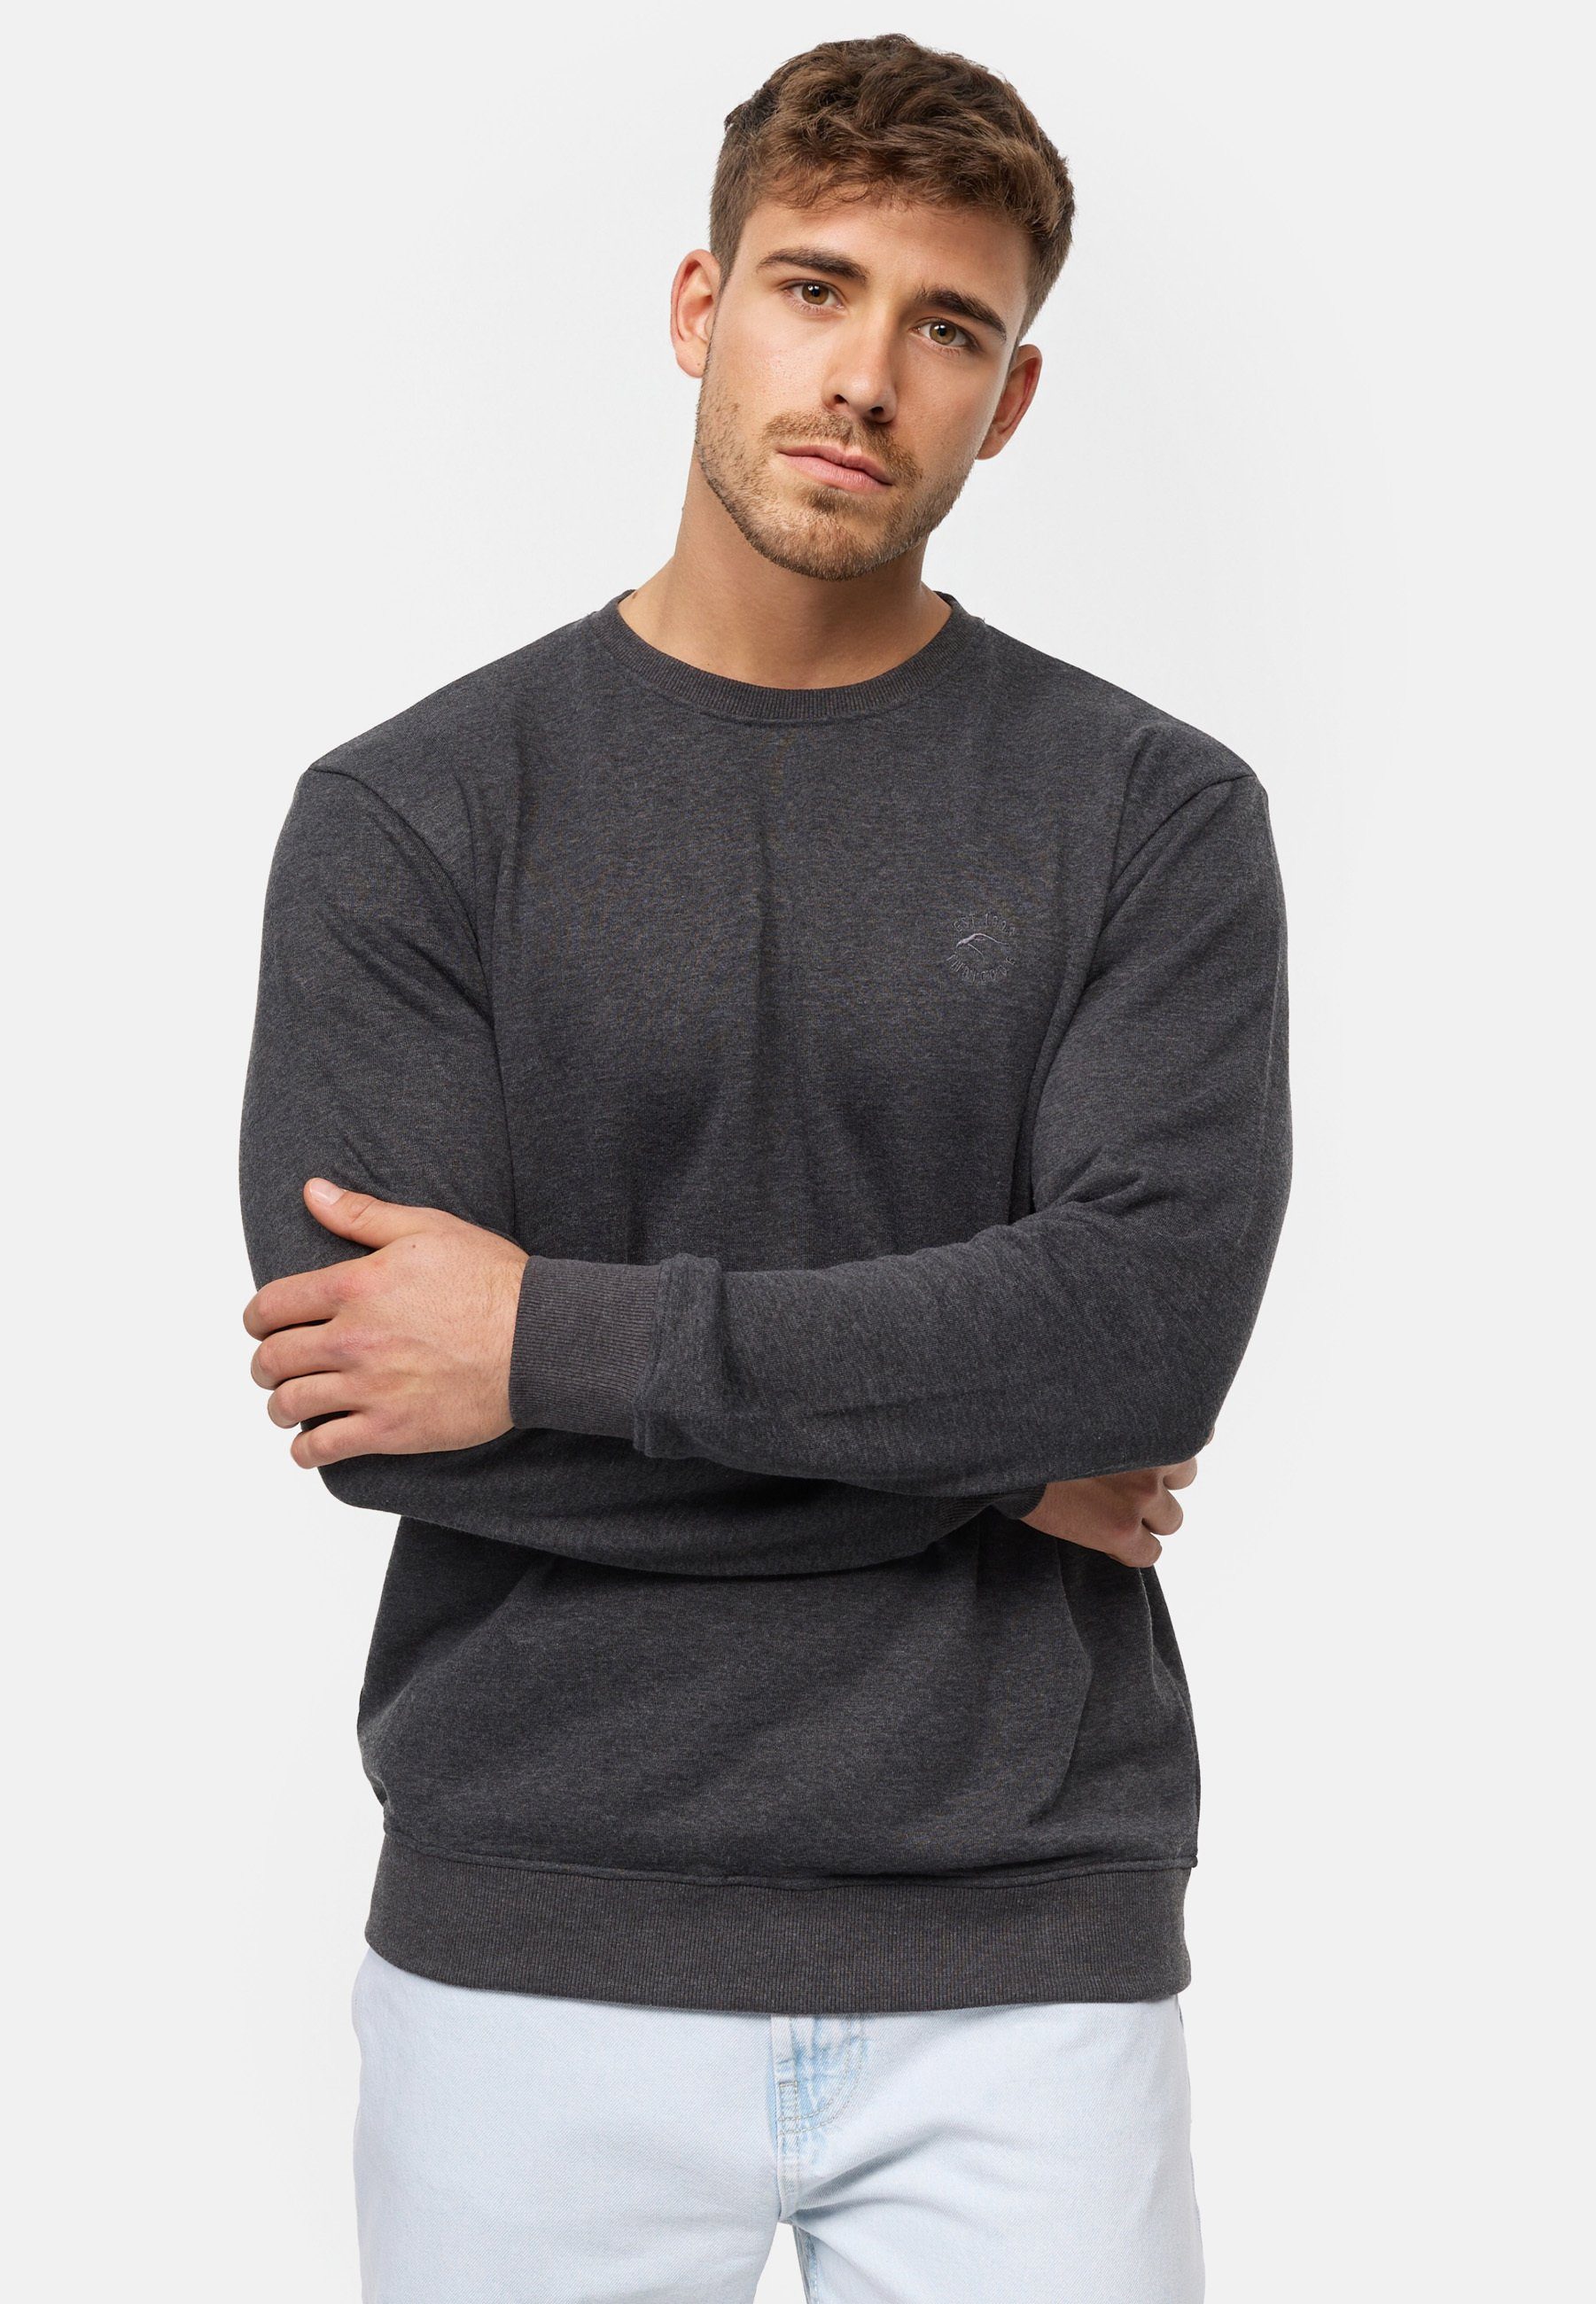 Mix Charcoal Sweater Holt Indicode